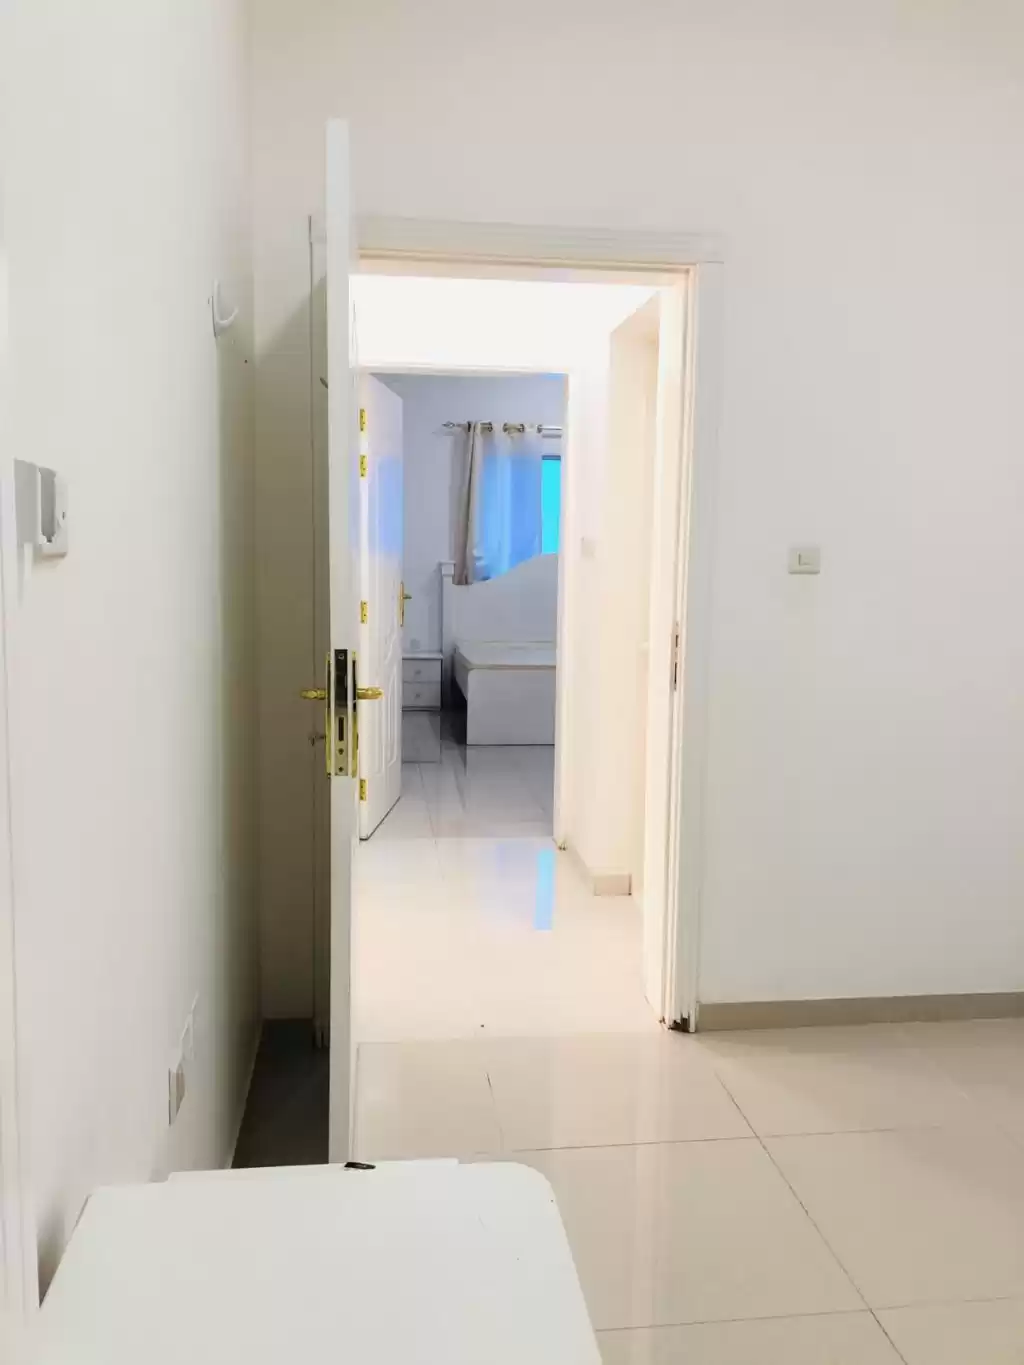 Residential Ready Property 2 Bedrooms F/F Apartment  for rent in Al Sadd , Doha #14071 - 1  image 